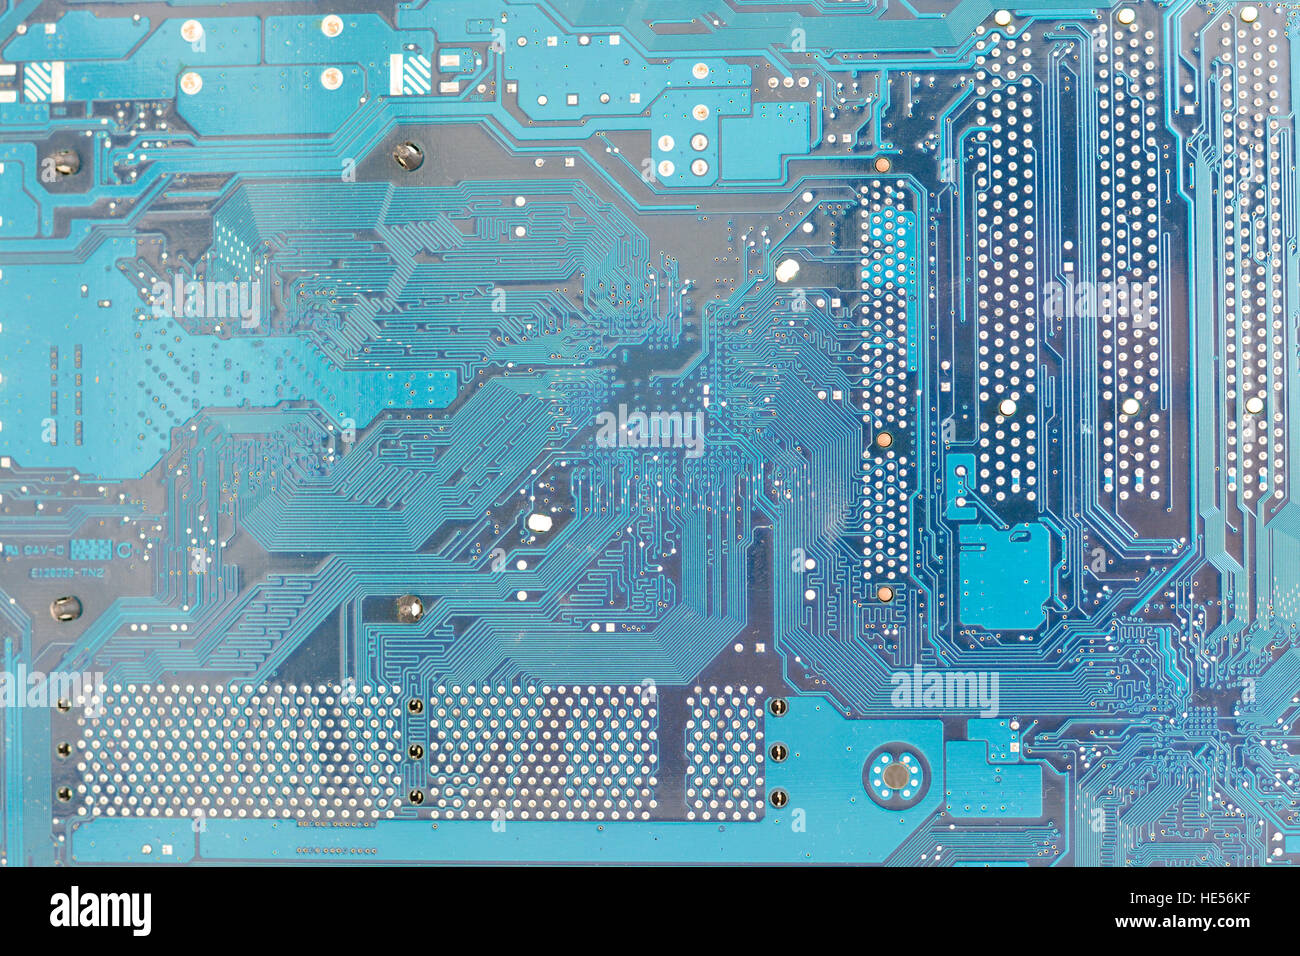 Computer motherboard or circuit board blue background Stock Photo